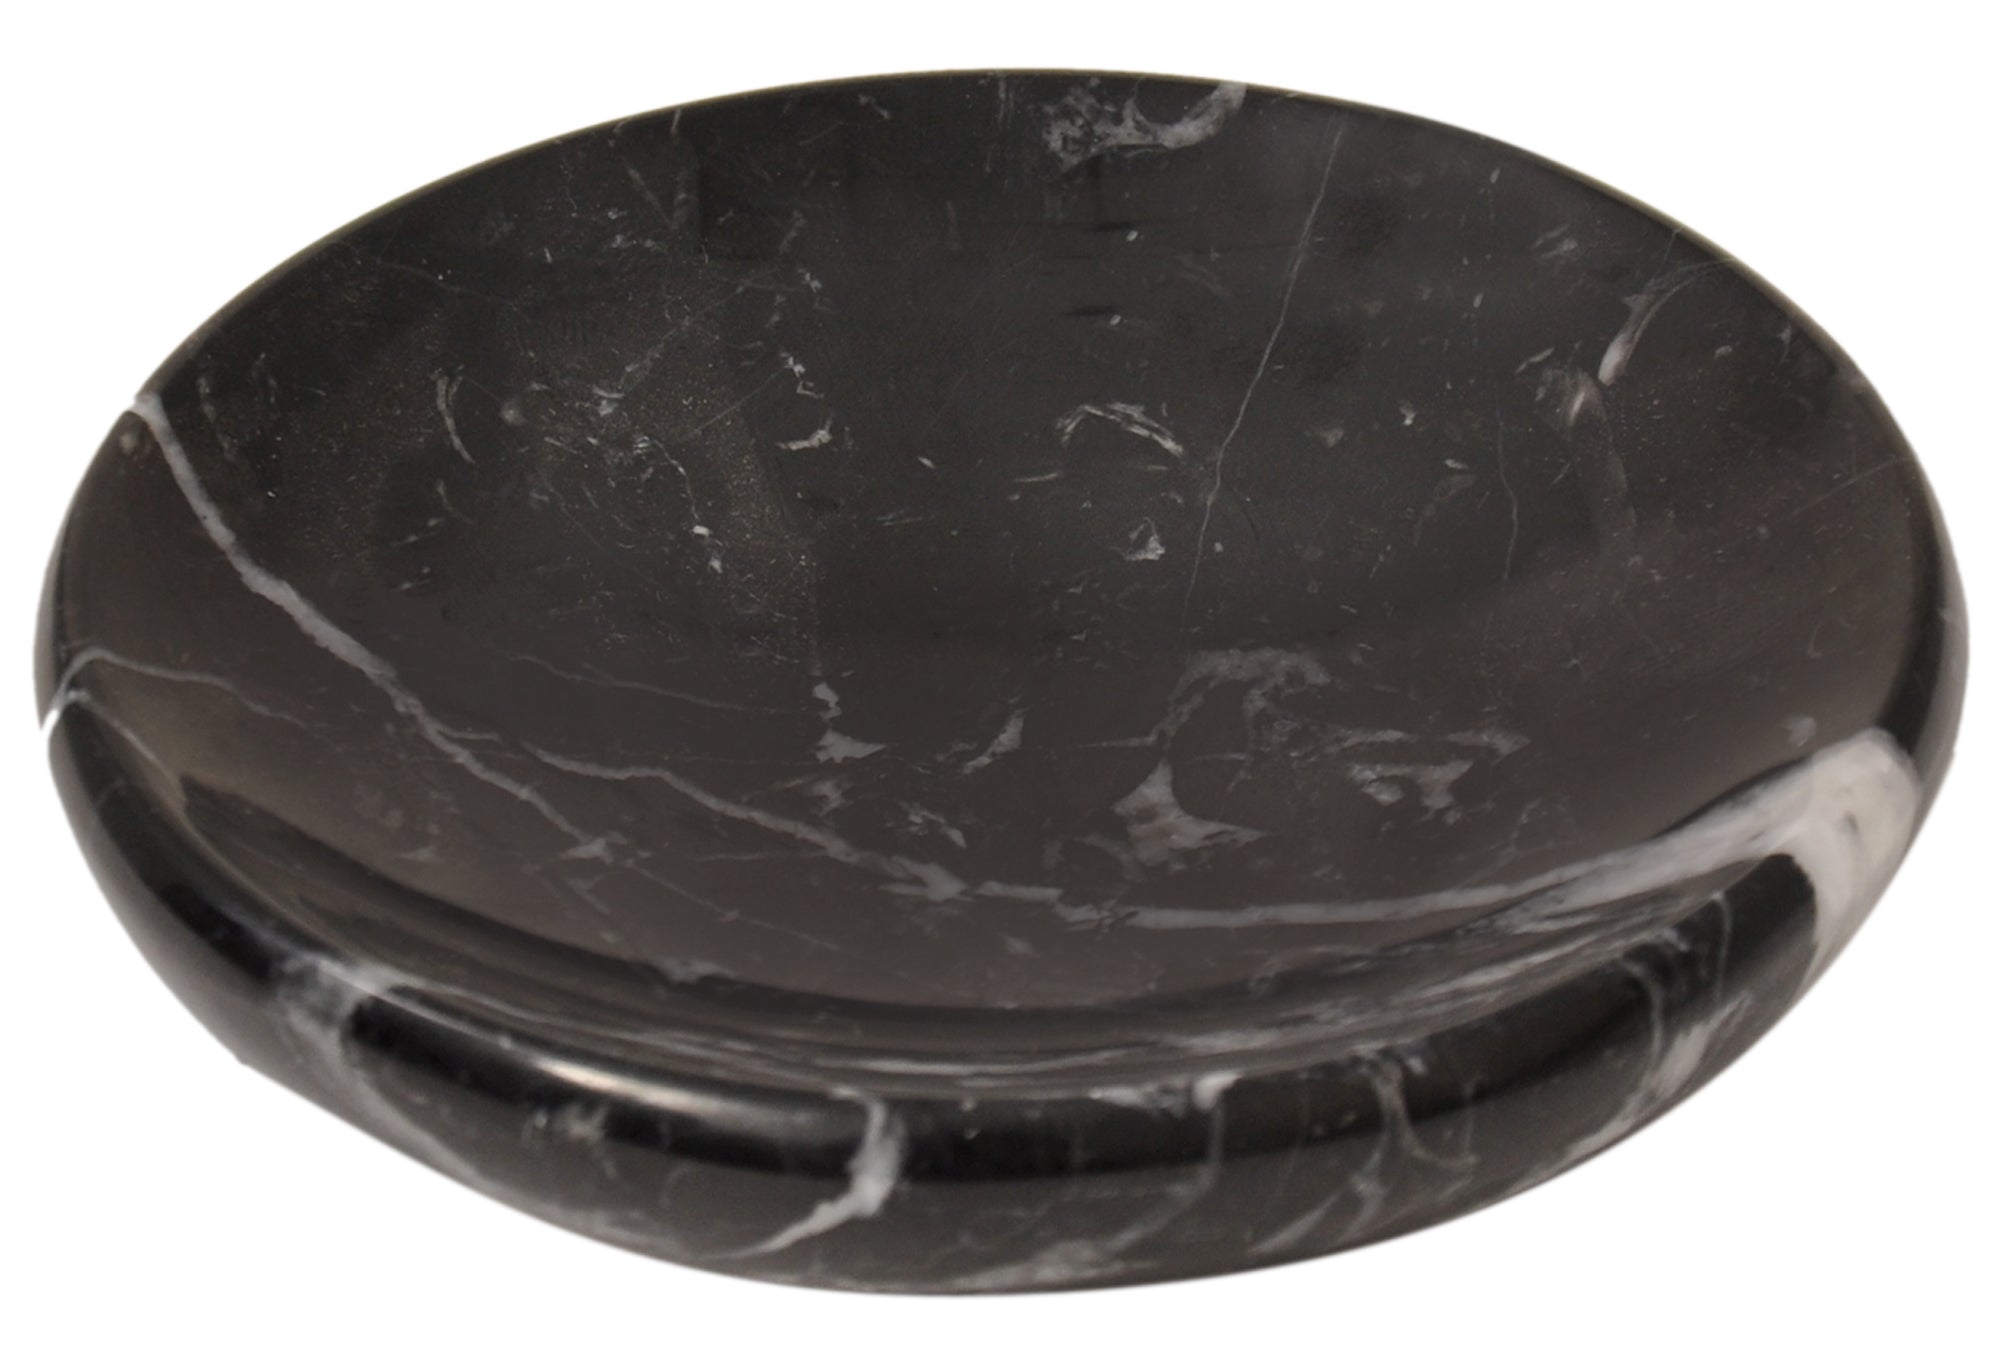 Black Marble Soap Dish - Polished and Shiny Marble Dish Holder - Beautifully Crafted Bathroom Accessory - by CraftsOfEgypt